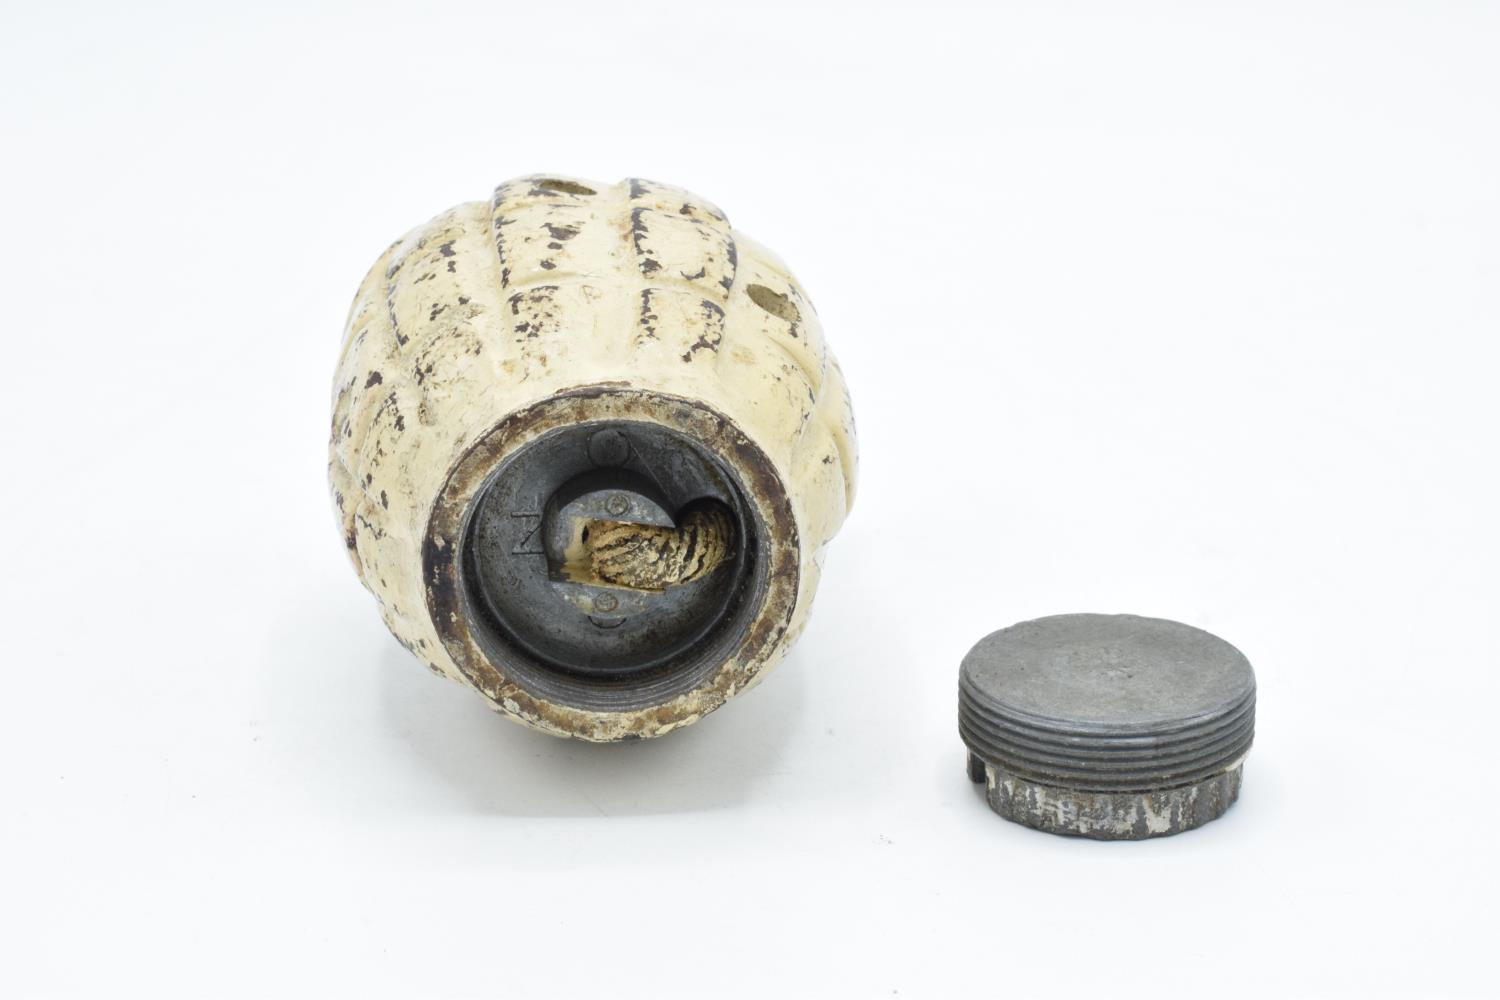 Mid-late 20th century Mills bomb Number 36 hand grenade, inept and FFE. The grenade has been drilled - Image 7 of 7